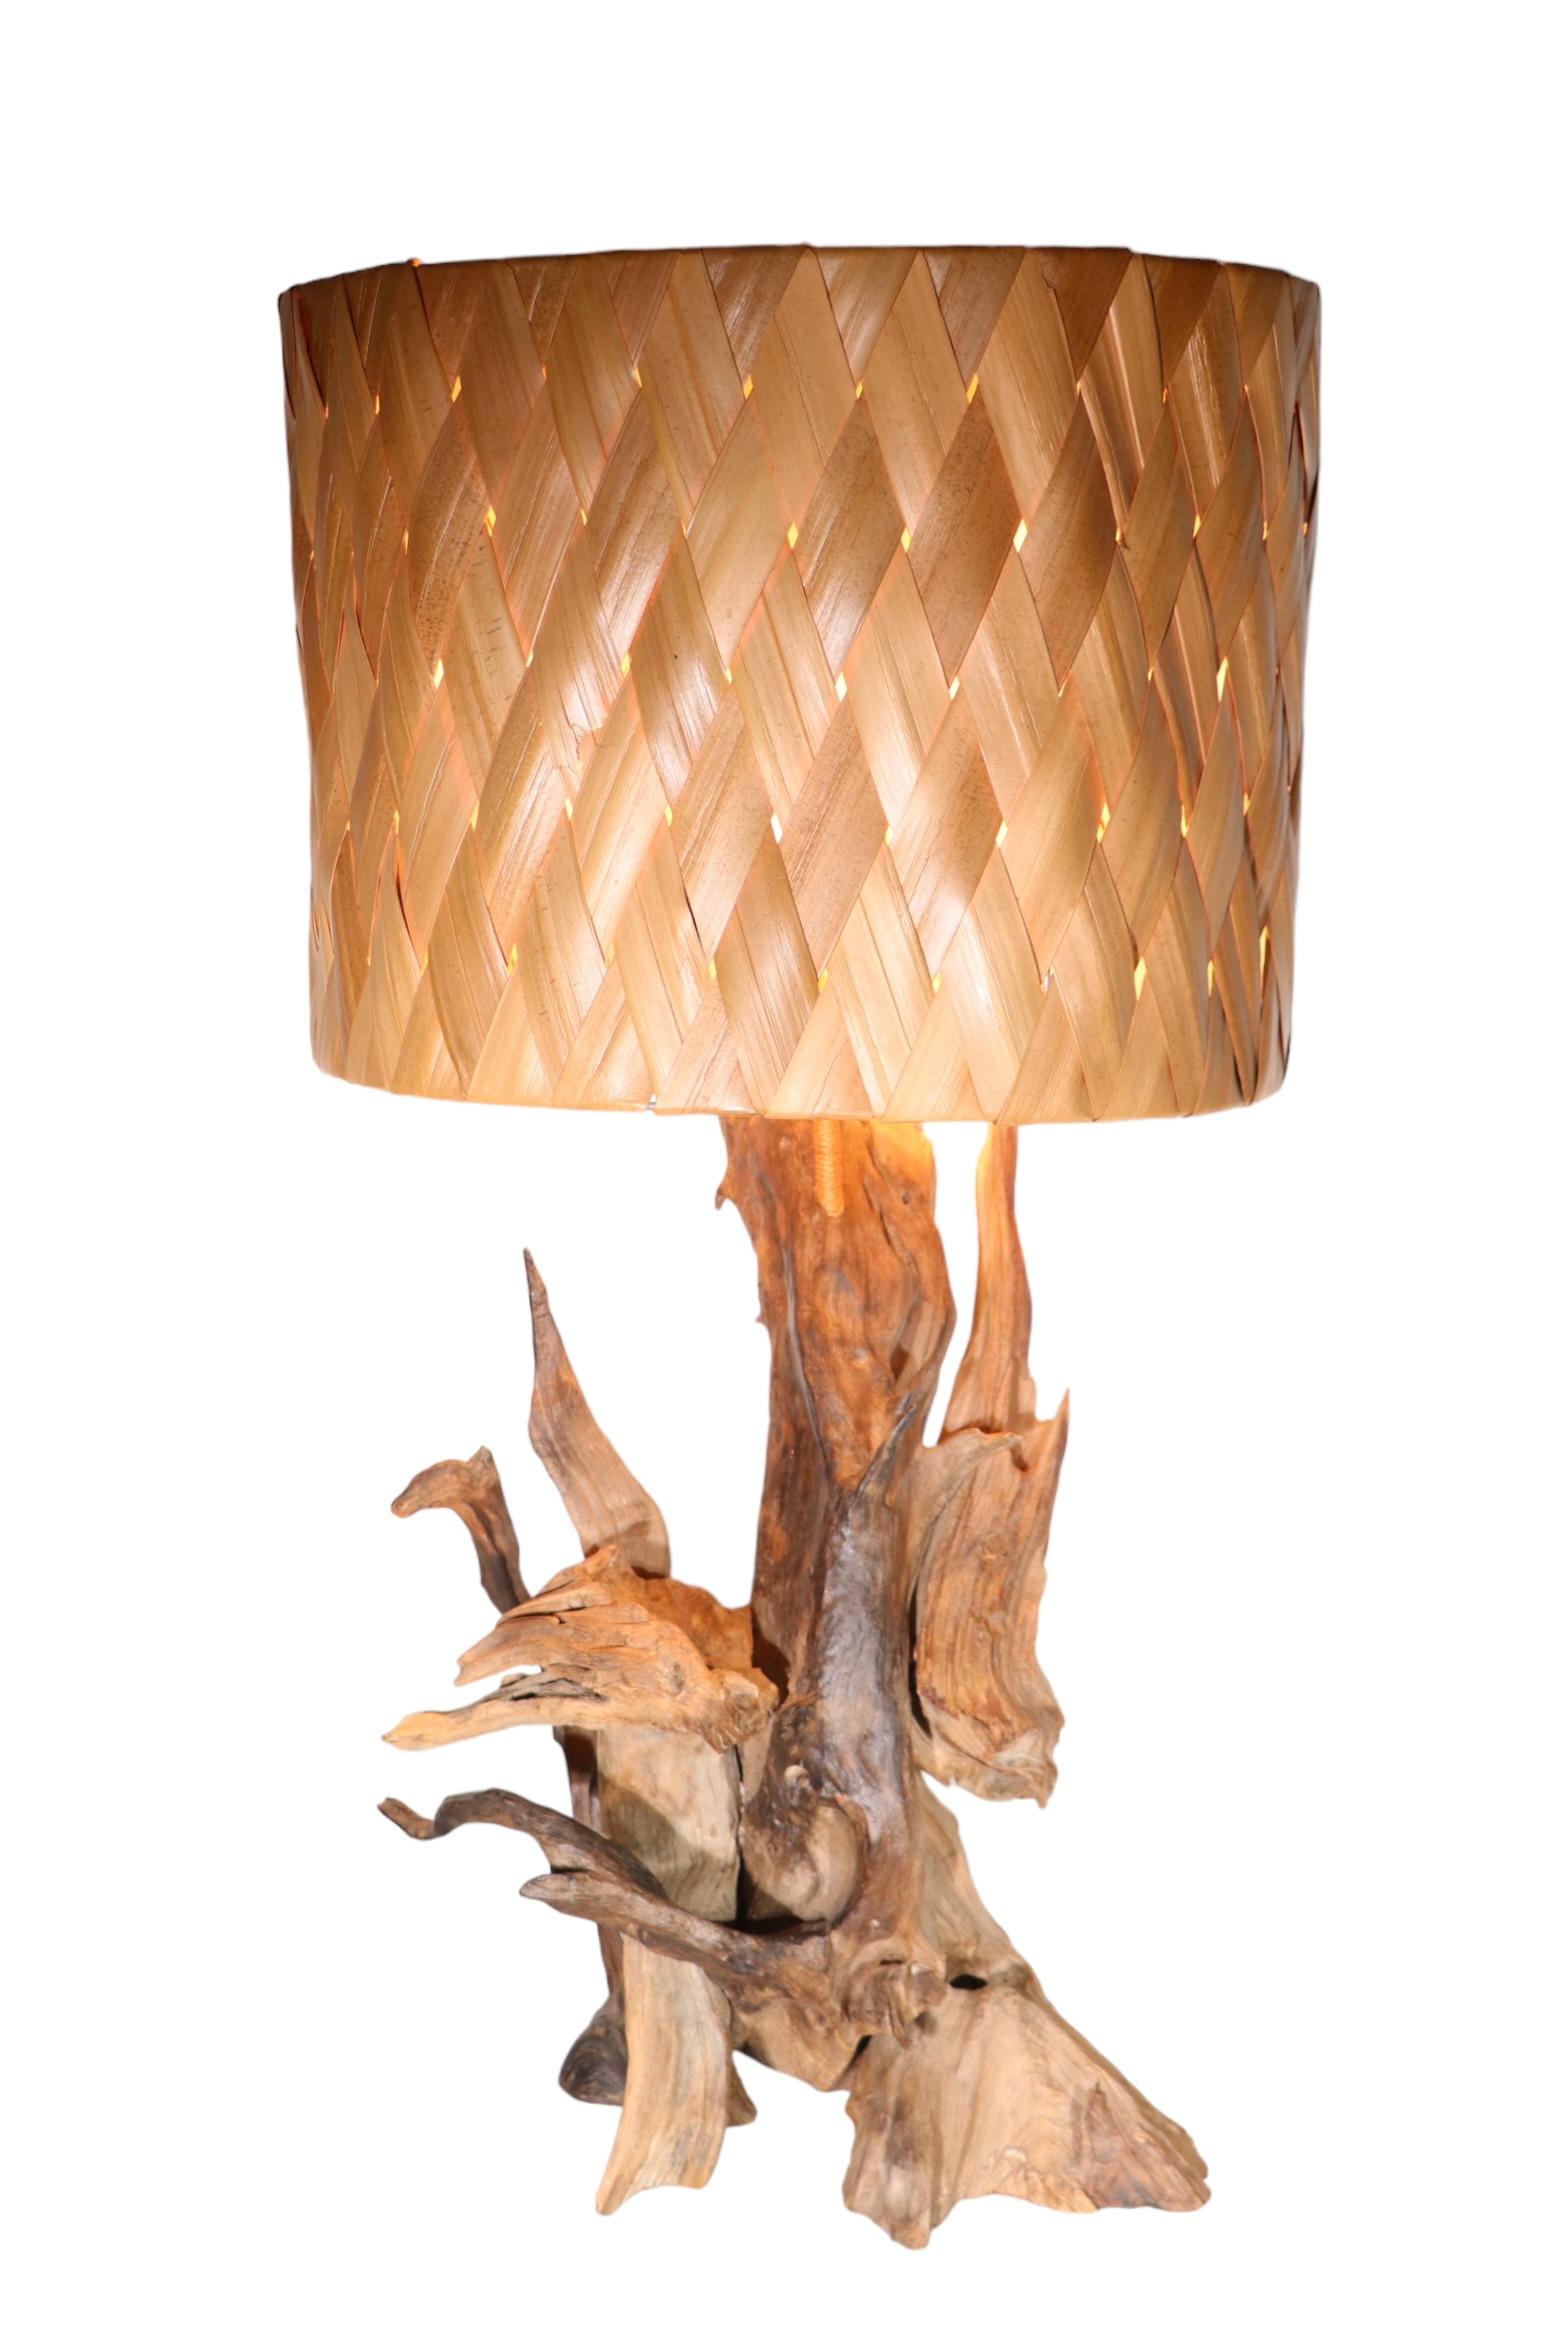 Mid Century Driftwood Table Lamp with Original Woven Rush Shade c 1950/1970's For Sale 4